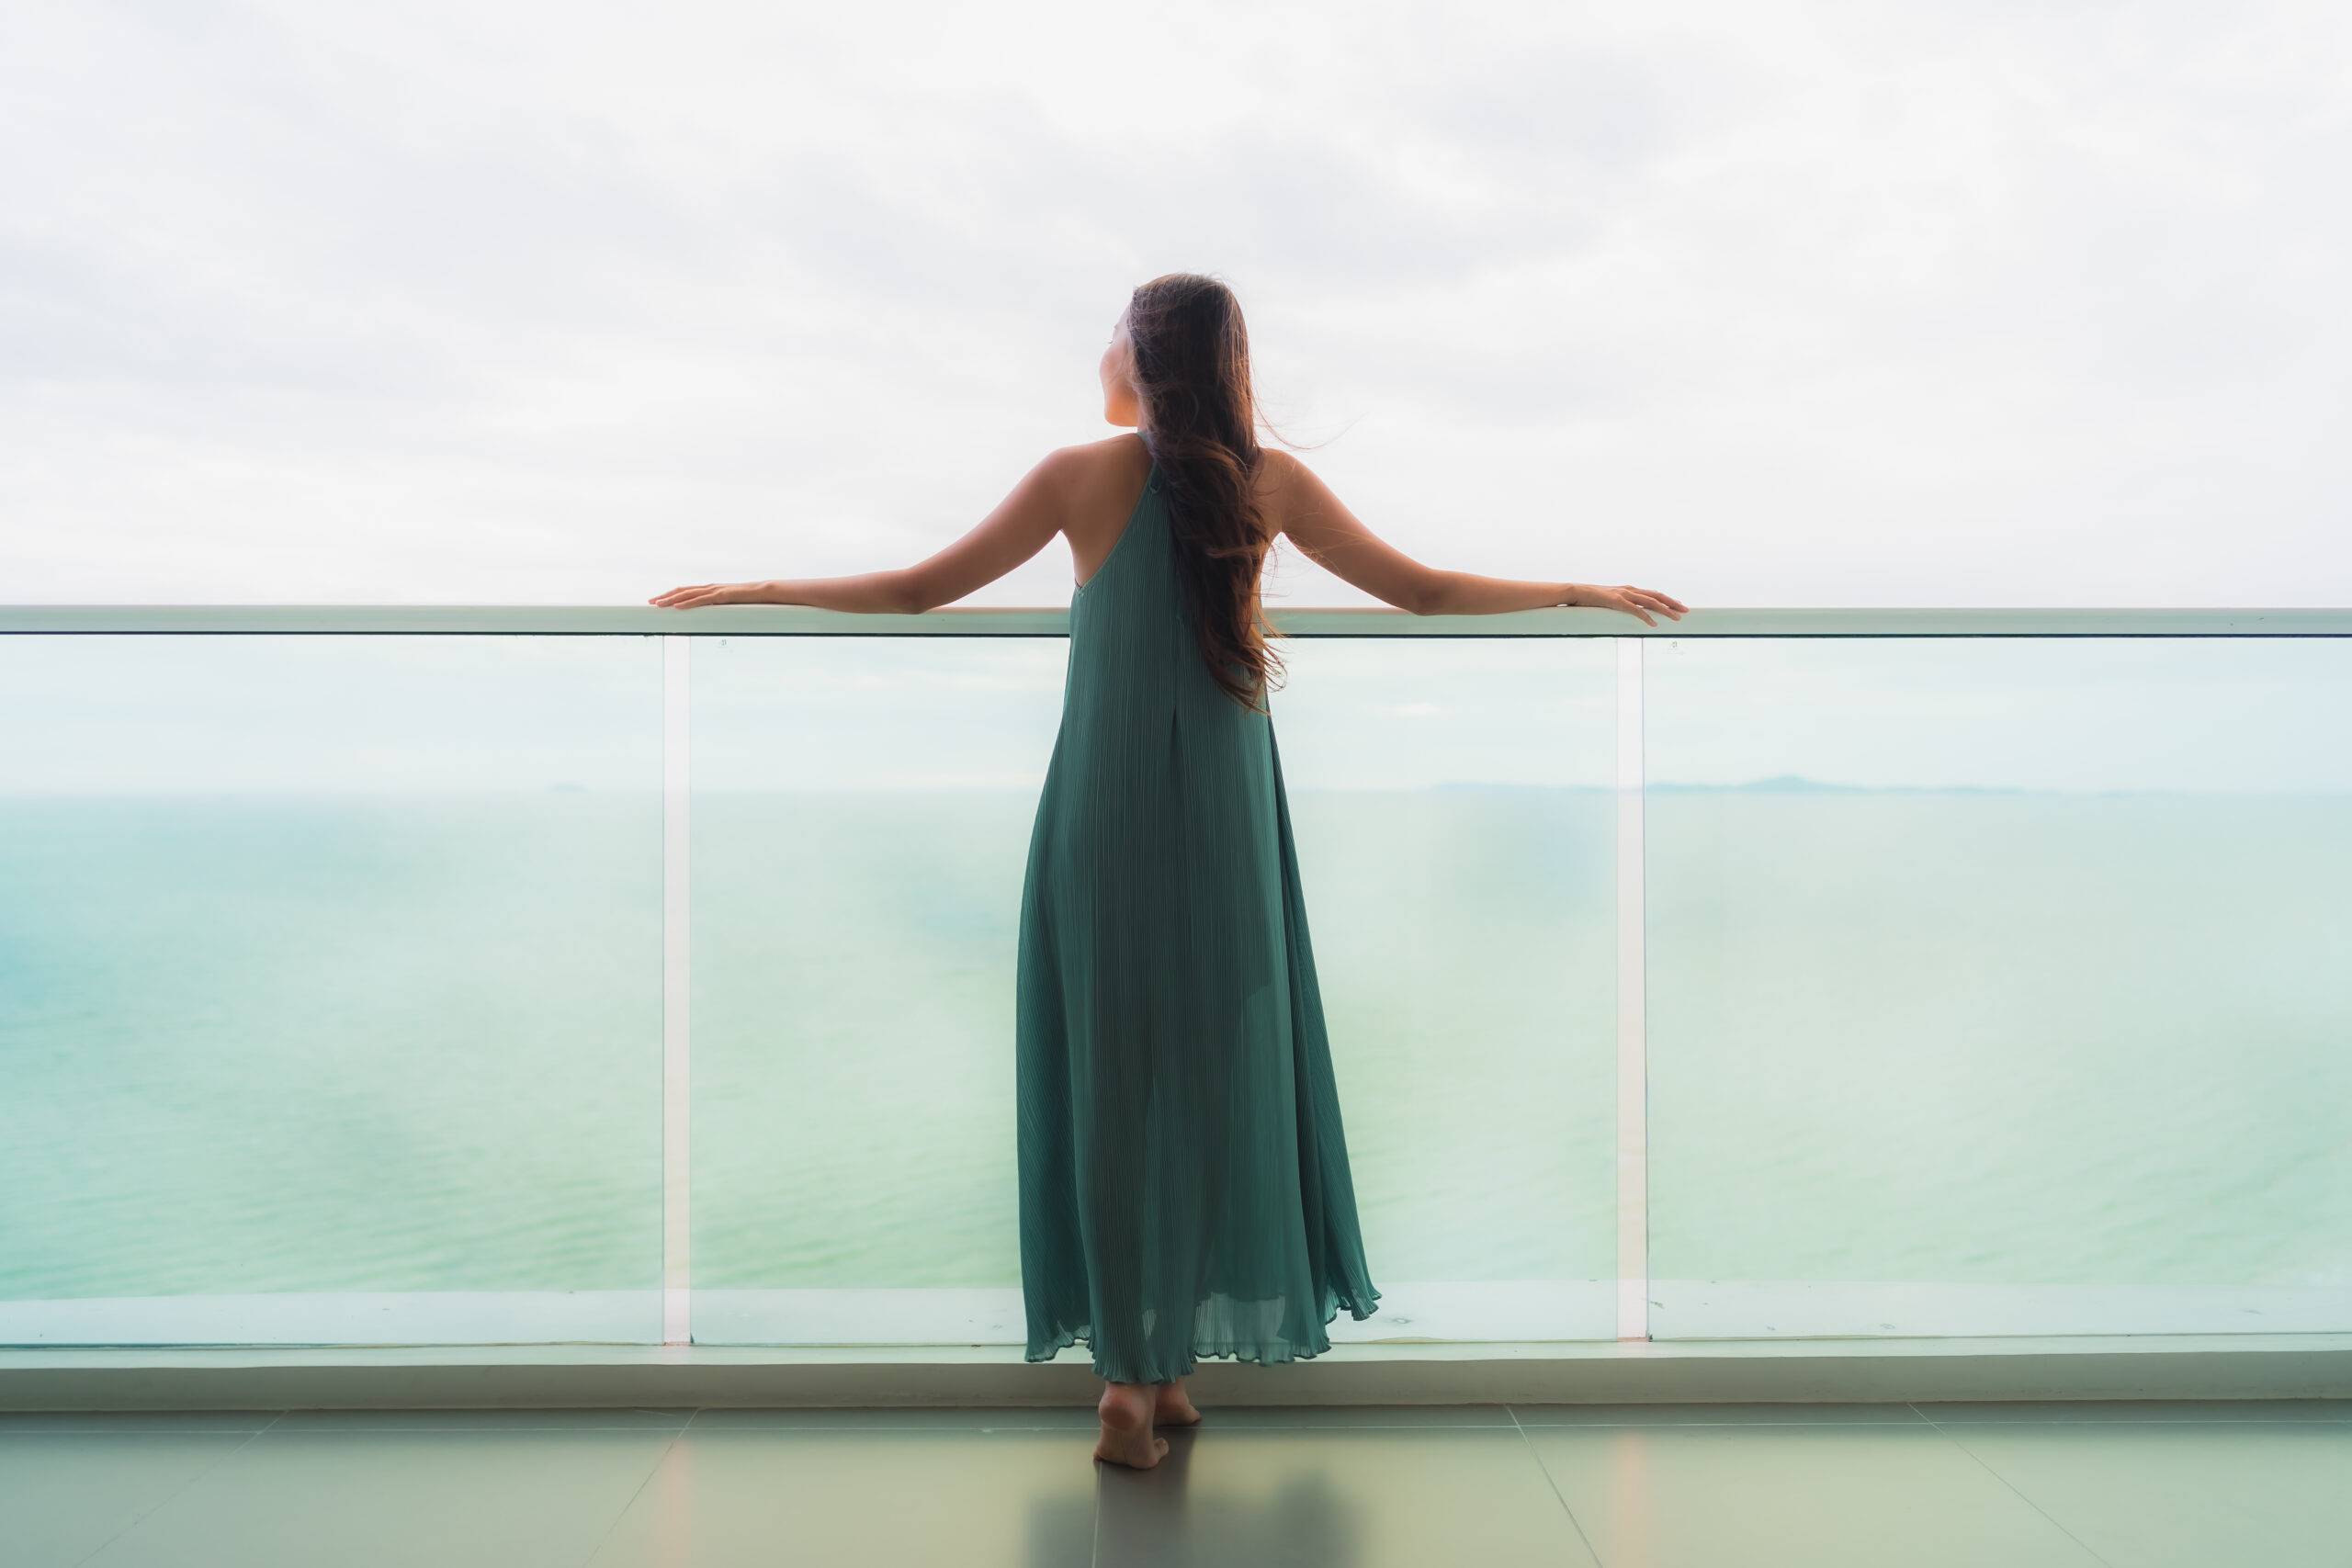 young woman in green dress looking out over a glass balcony